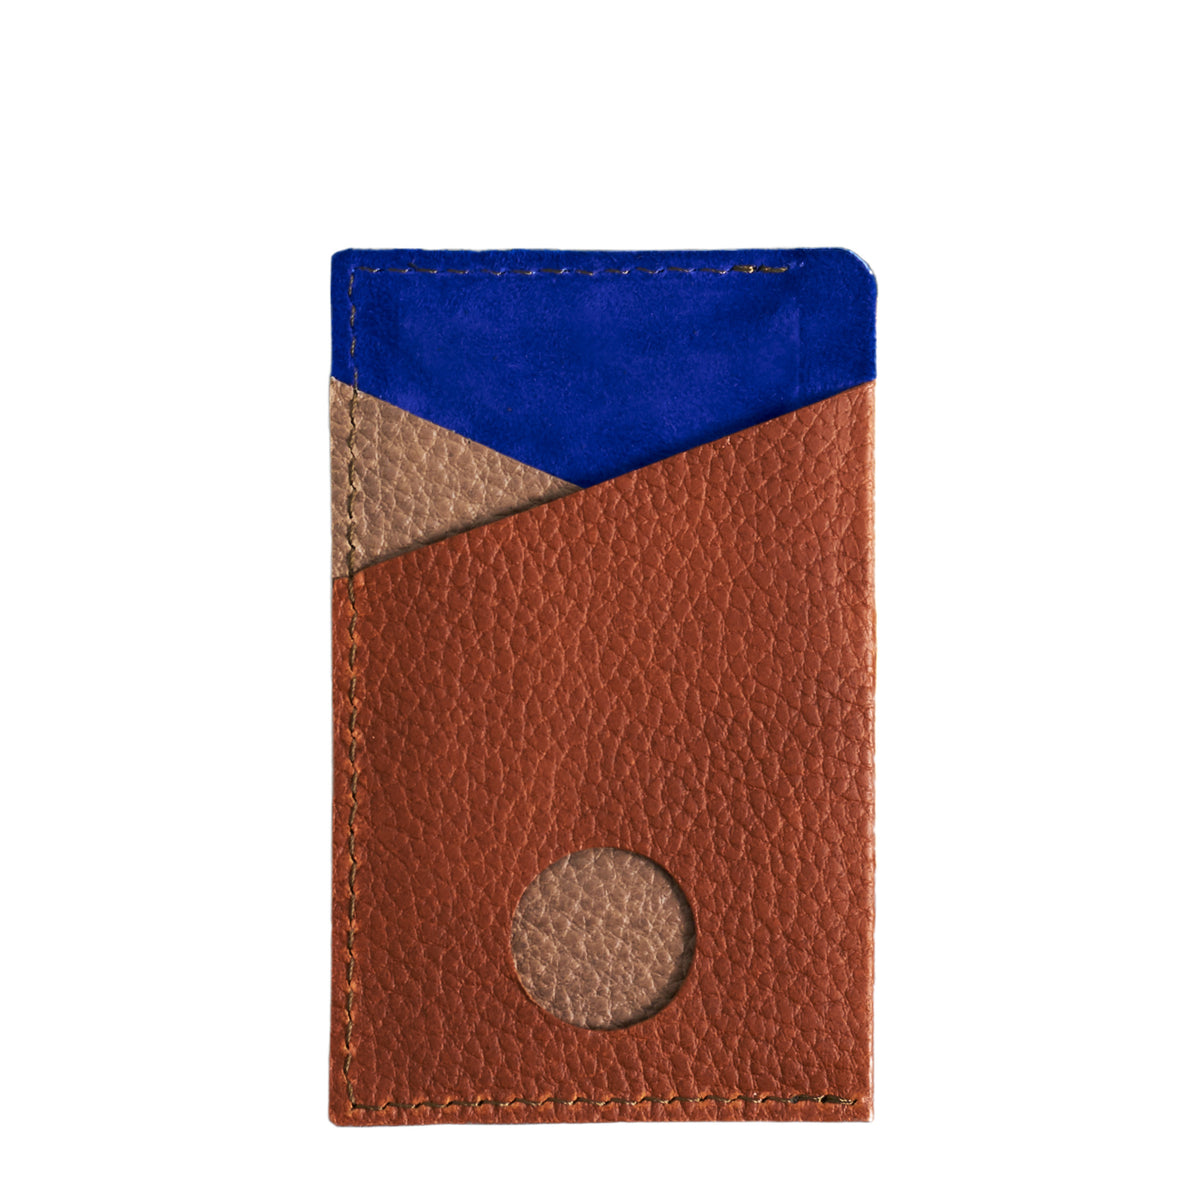 Back Cover. Card Holder Wallet Remix by Capra Leather